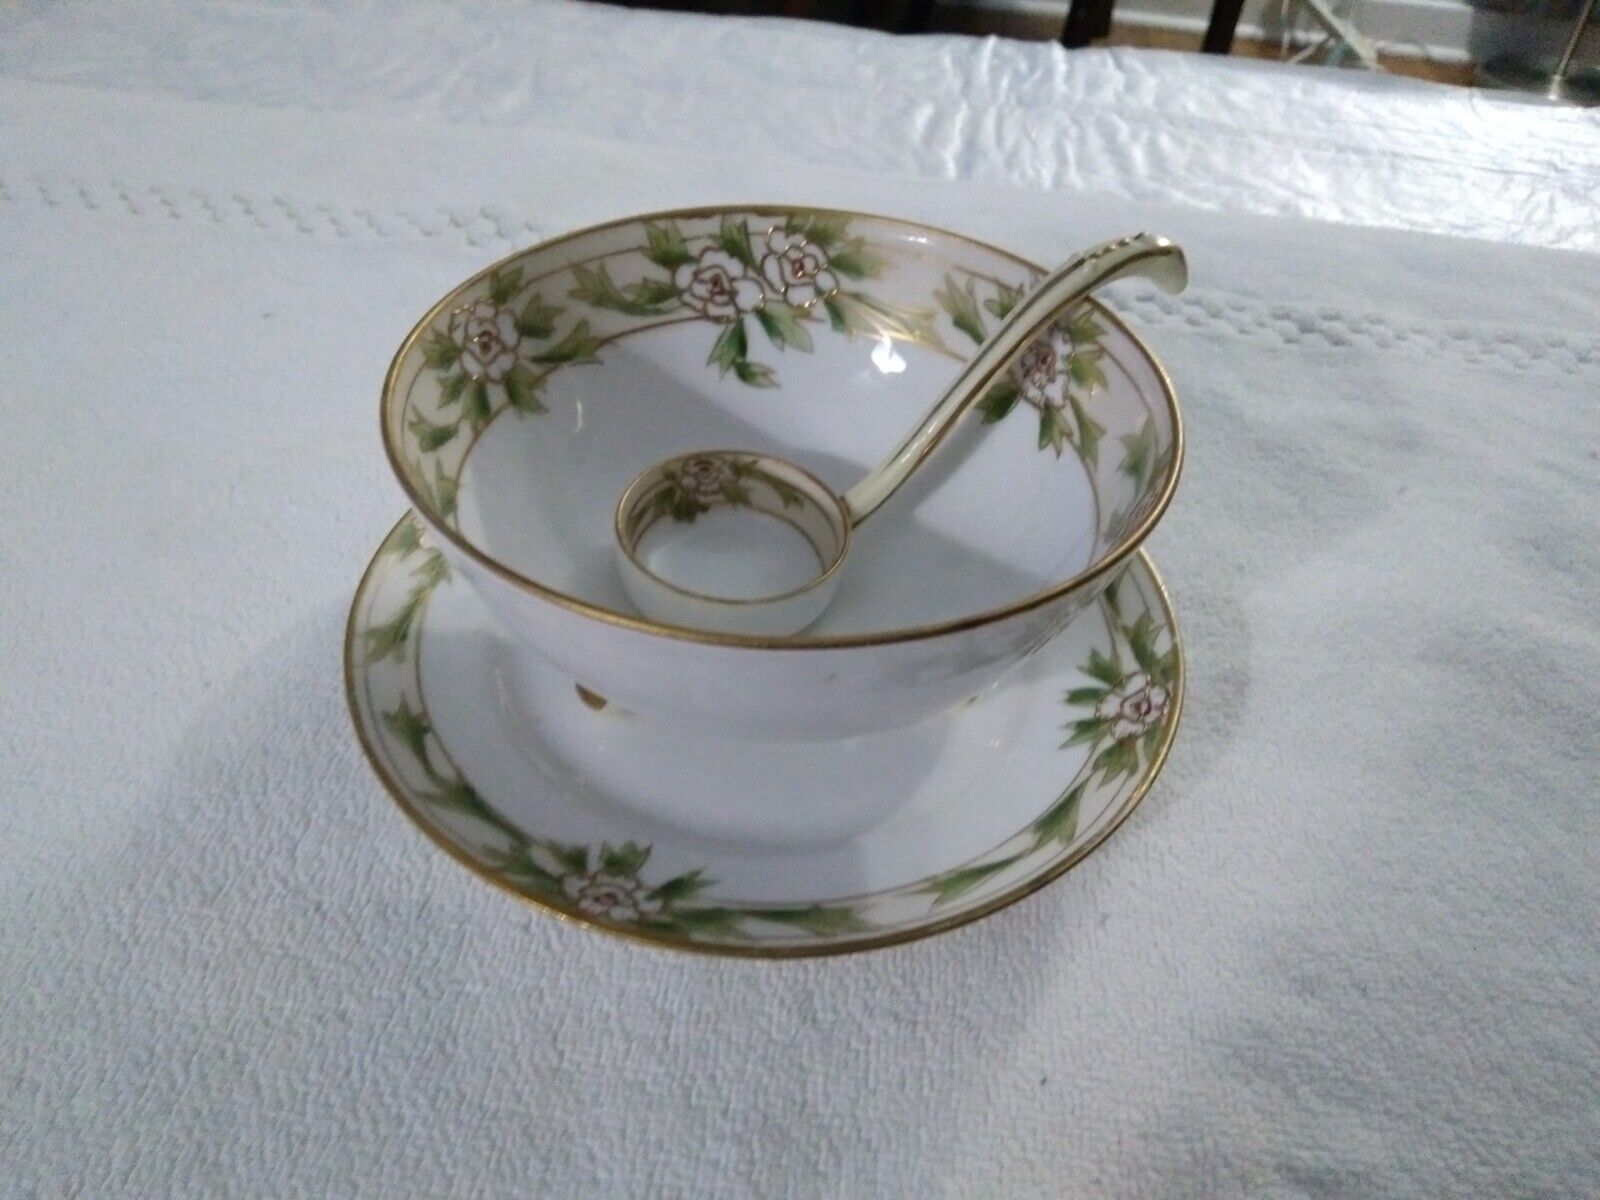 Antq. NIPPON, Japan Soup or Gravy bowl with matching under plate and ladle